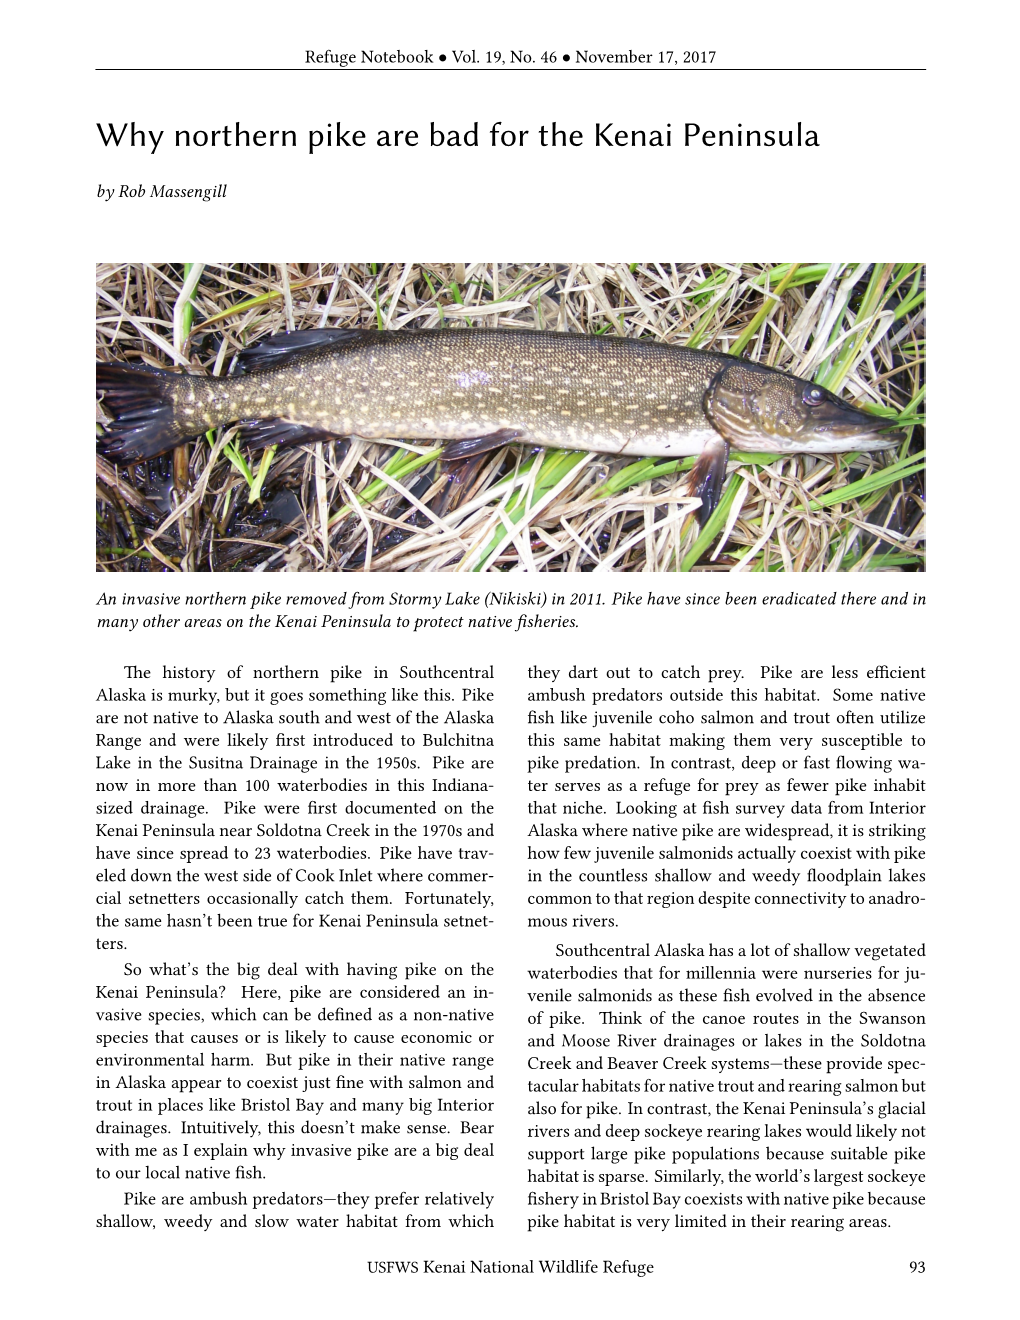 Why Northern Pike Are Bad for the Kenai Peninsula by Rob Massengill